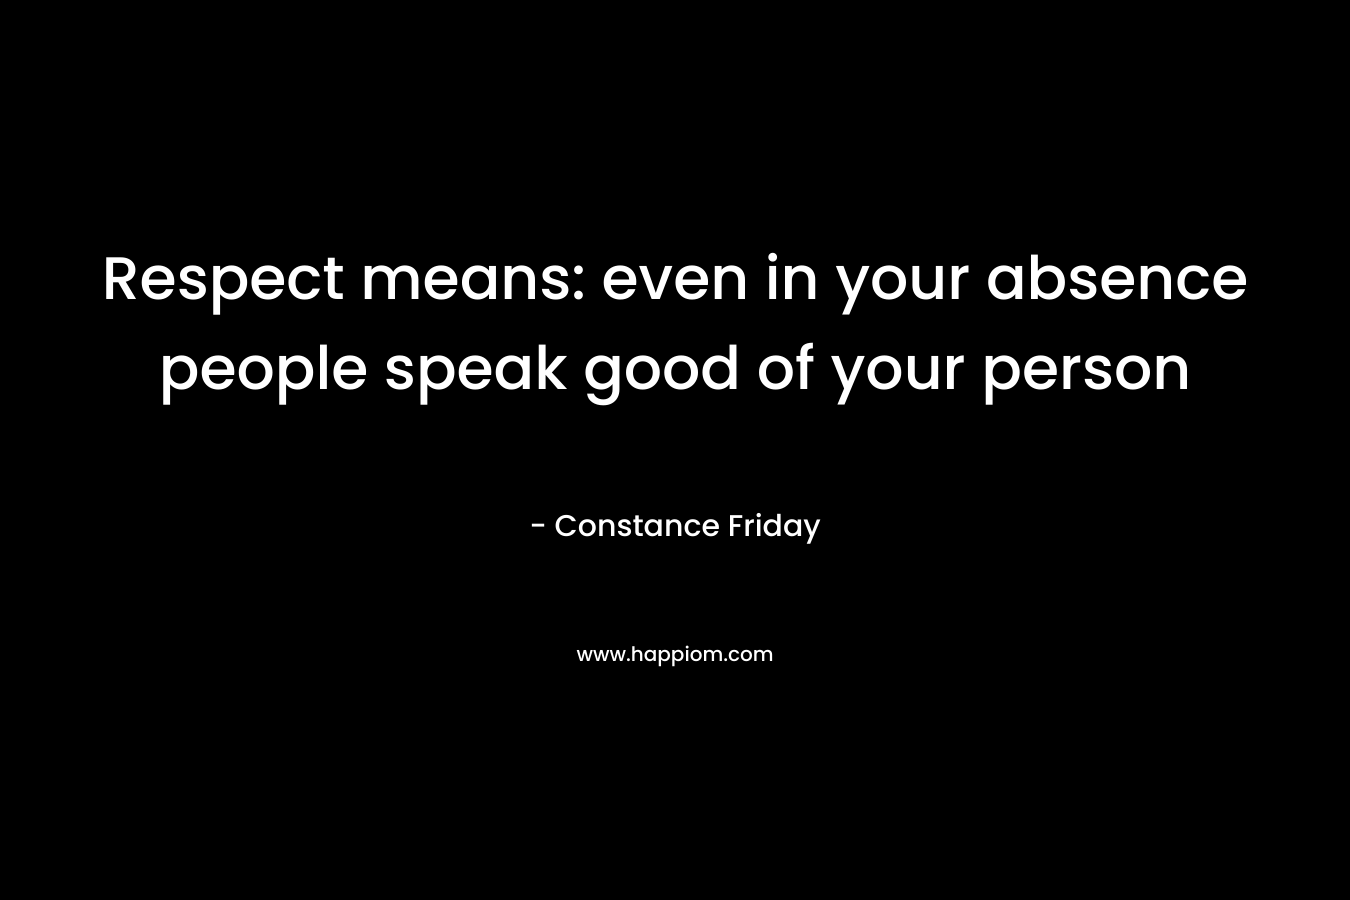 Respect means: even in your absence people speak good of your person